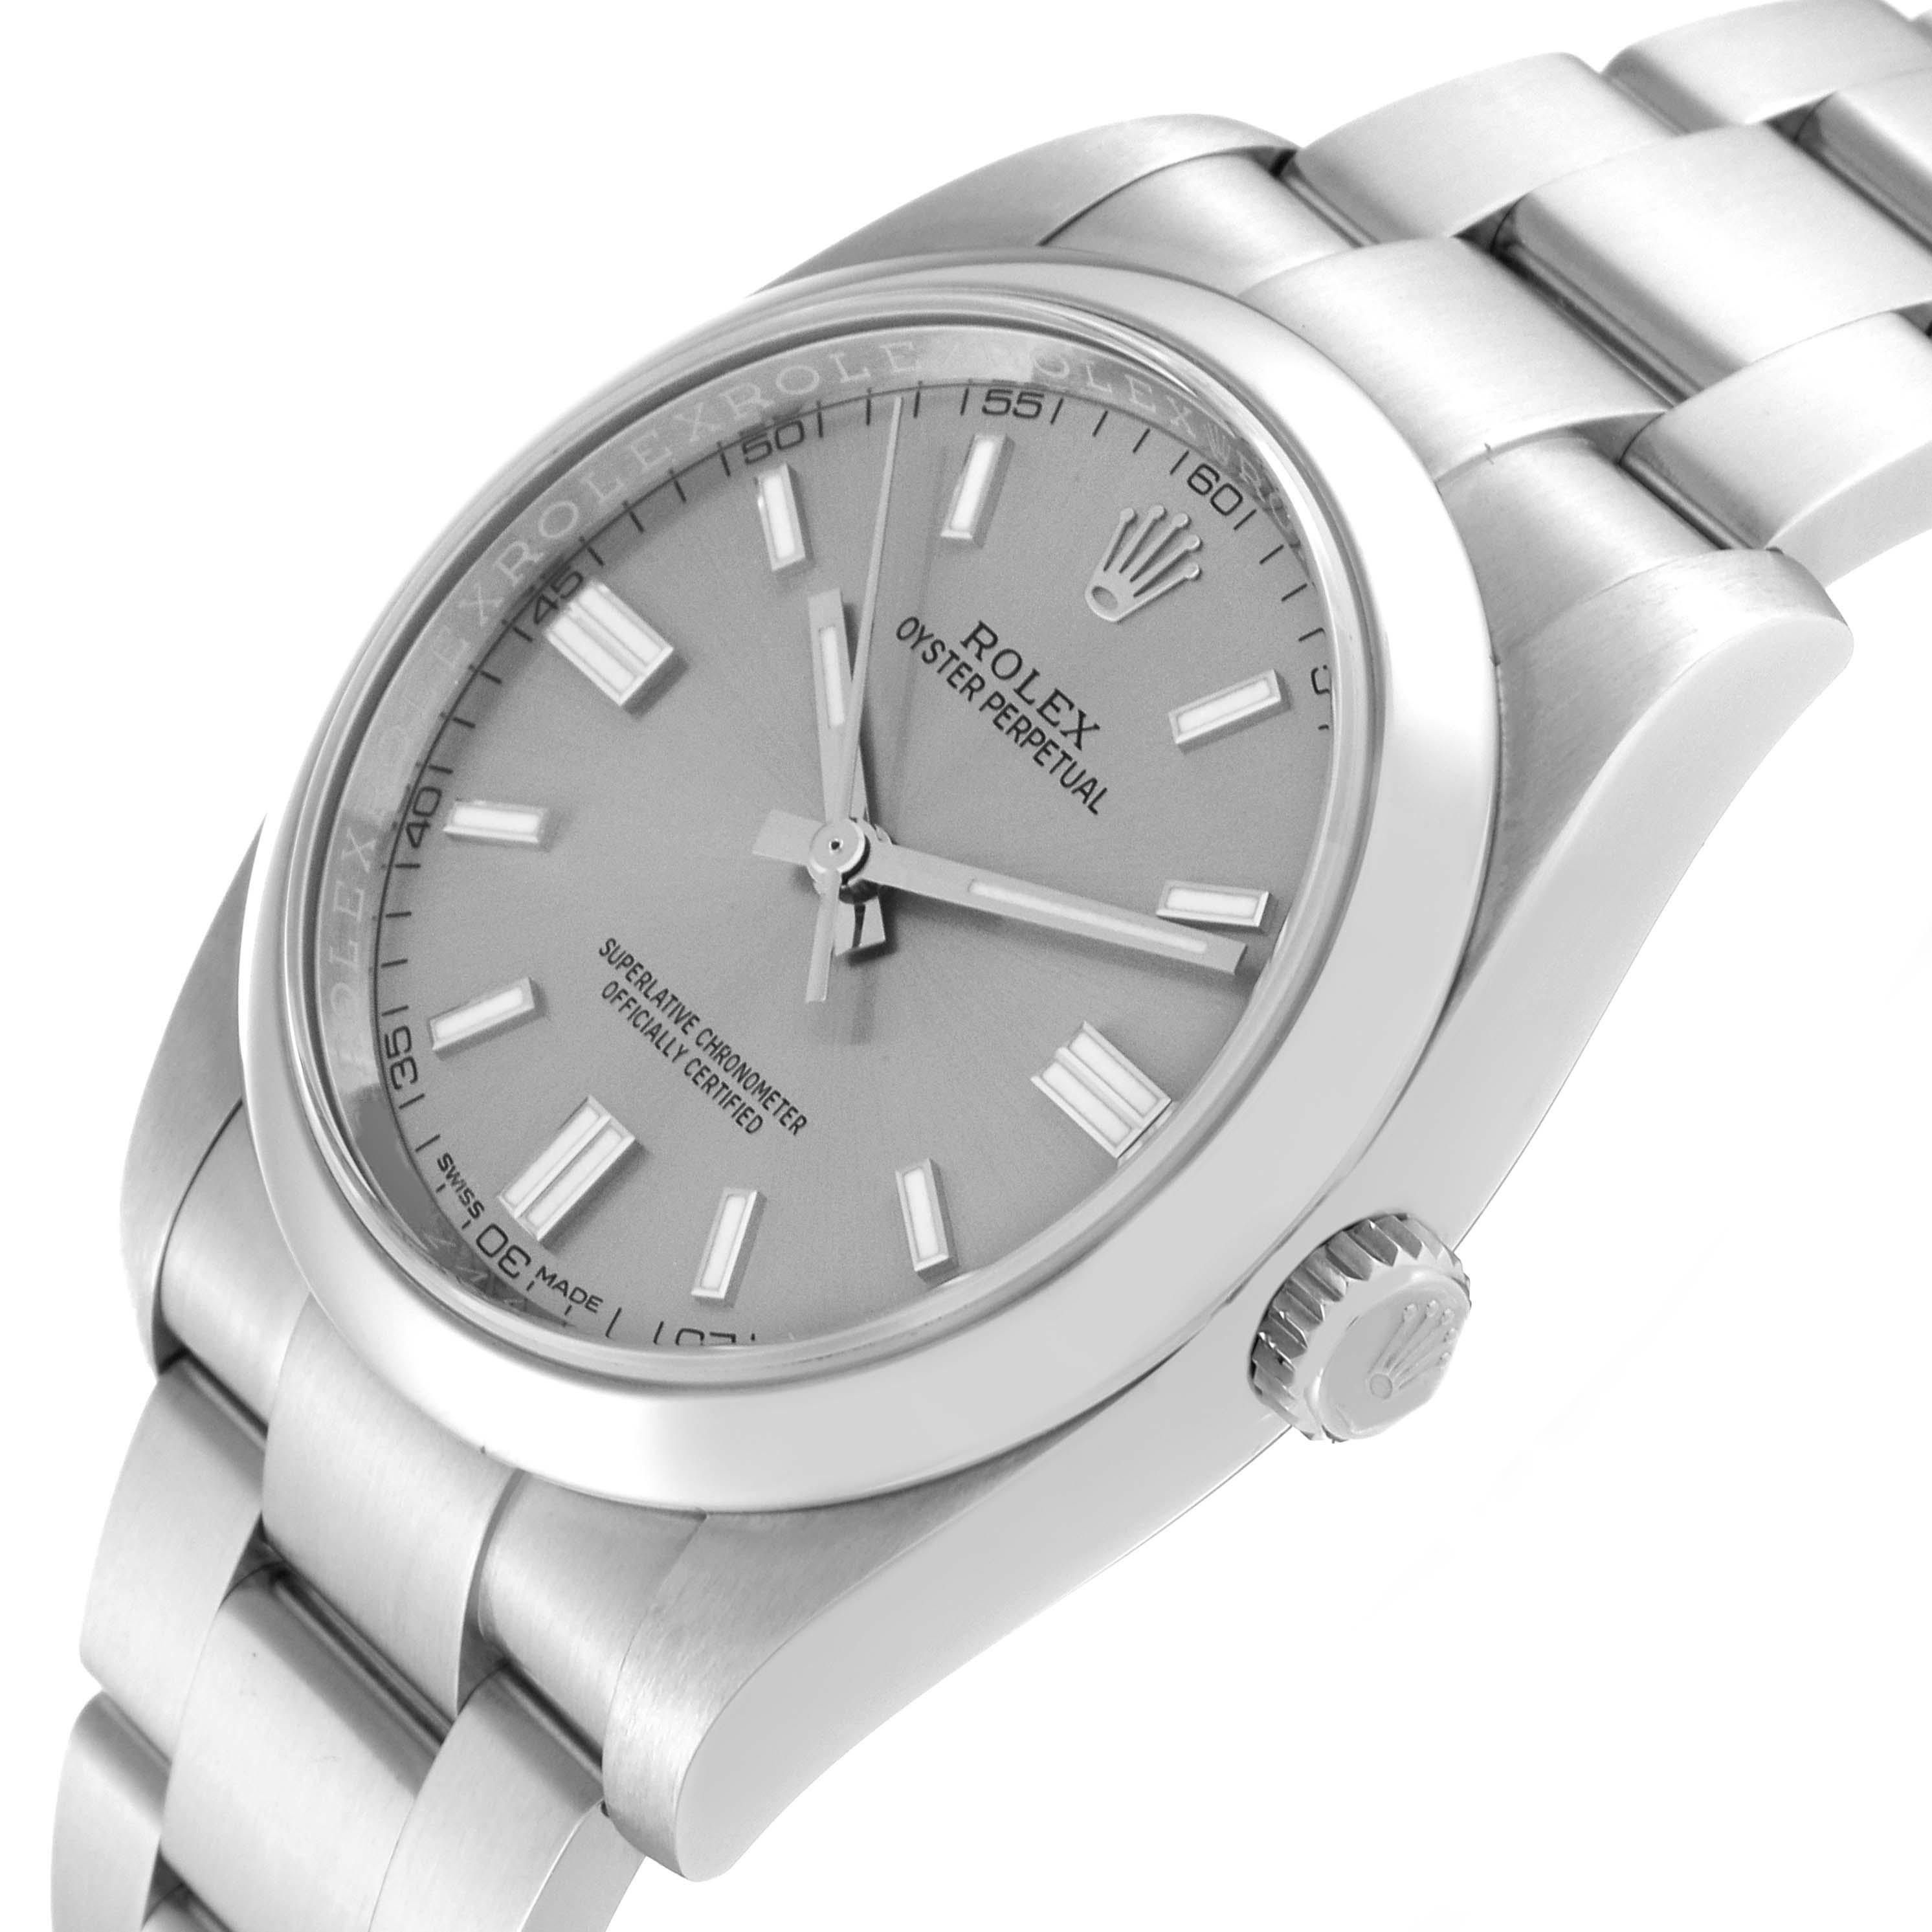 Rolex Oyster Perpetual 36 Grey Dial Steel Mens Watch 116000 Box Card. Officially certified chronometer self-winding movement. Stainless steel case 36.0 mm in diameter. Rolex logo on a crown. Stainless steel smooth domed bezel. Scratch resistant